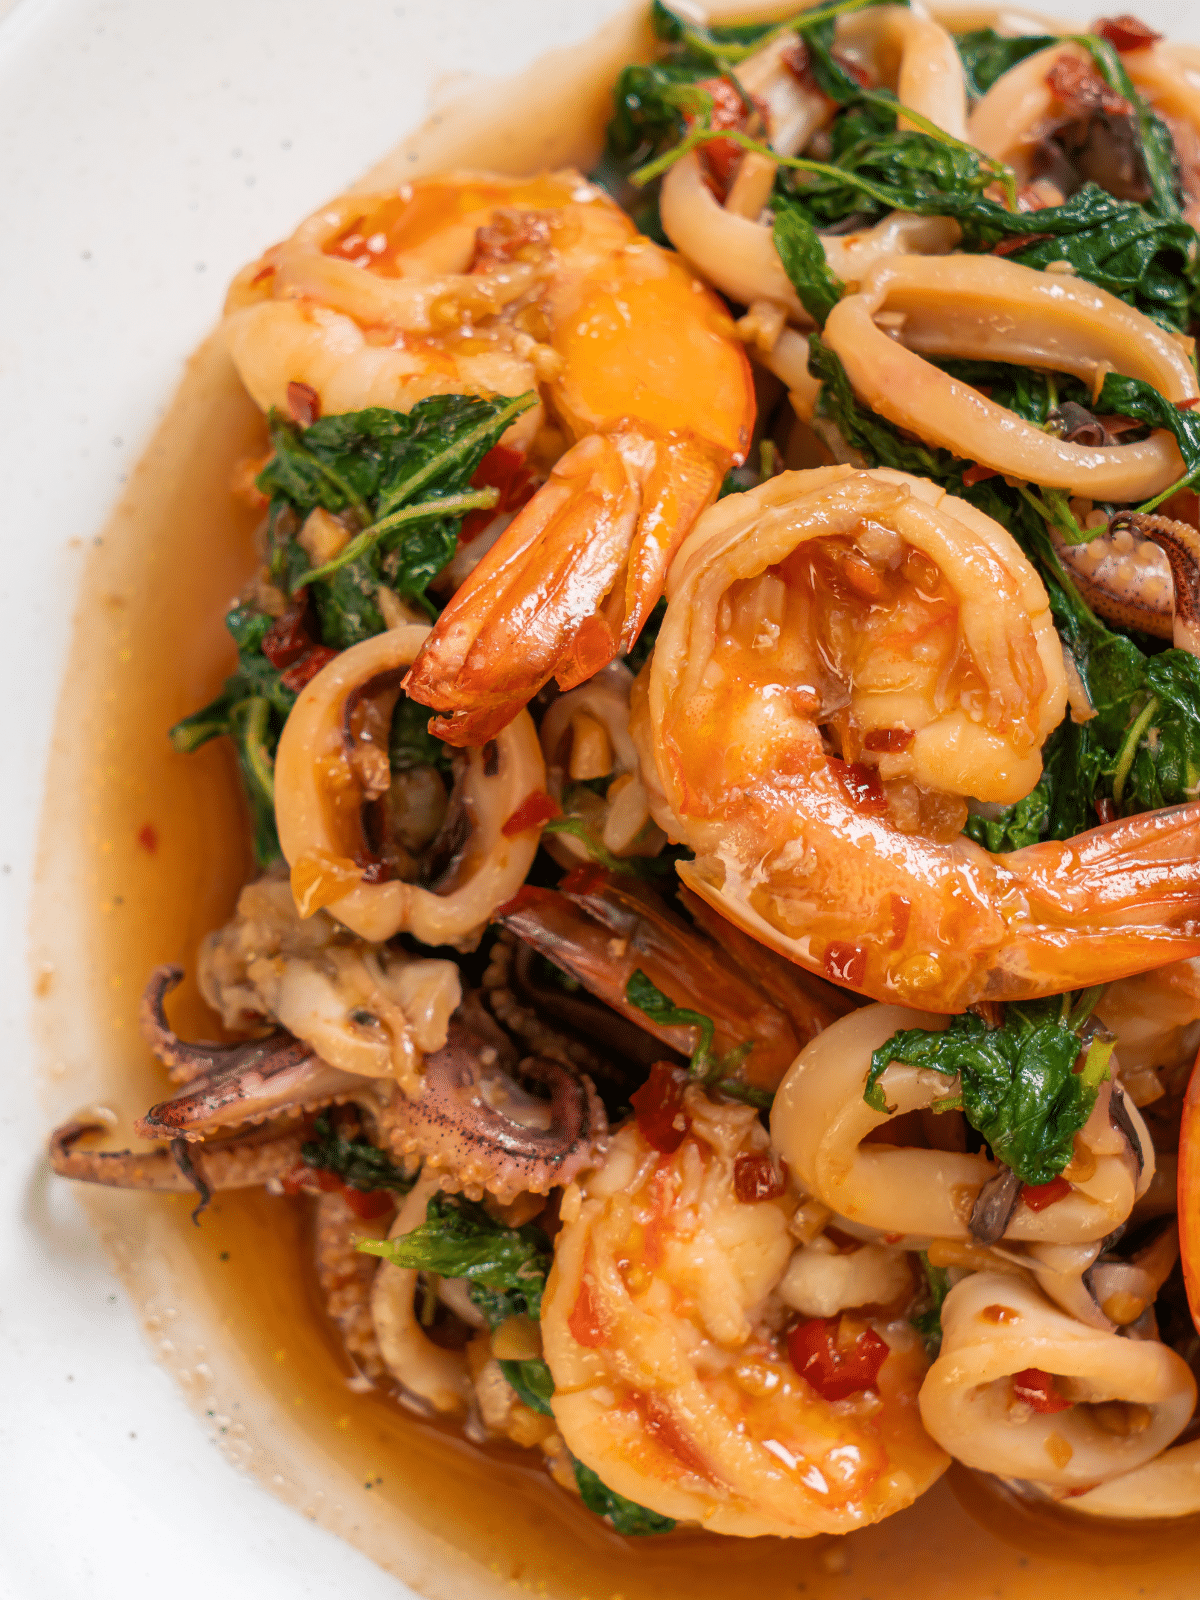 Stir-fried seafood with Thai basil on a white serving plate.